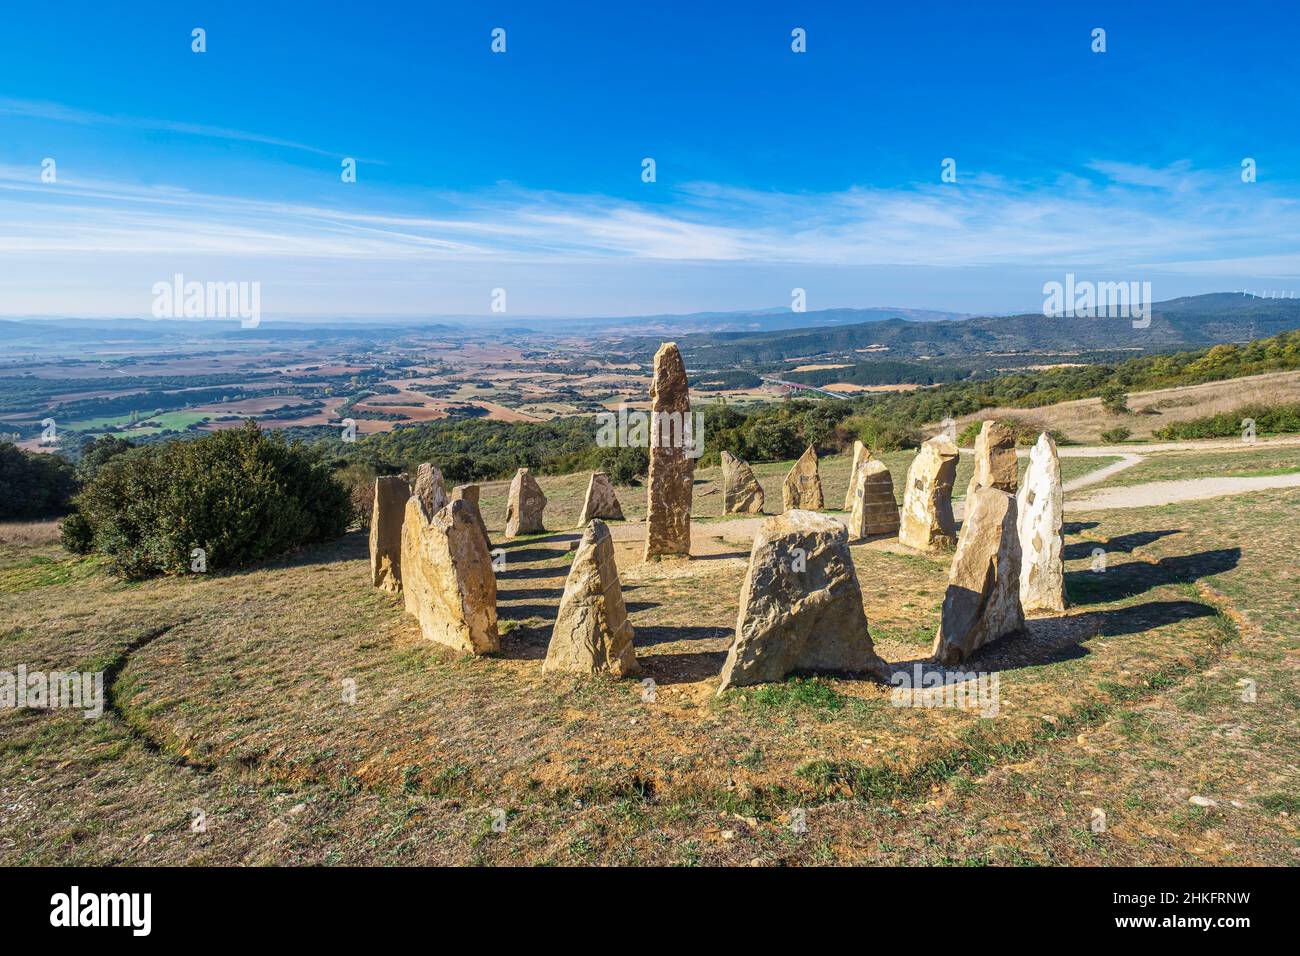 Spain, Navarre, surroundings of Zariquiegui (Zarikiegi), Alto del Perdon (alt : 770m), pass on the Camino Francés, Spanish route of the pilgrimage to Santiago de Compostela, listed as a UNESCO World Heritage Site, memorial of the 92 people murdered in the Sierra del Perdon during the years 1936-37 by the Francoist repression, work of the sculptor Pello Iraizoz Stock Photo